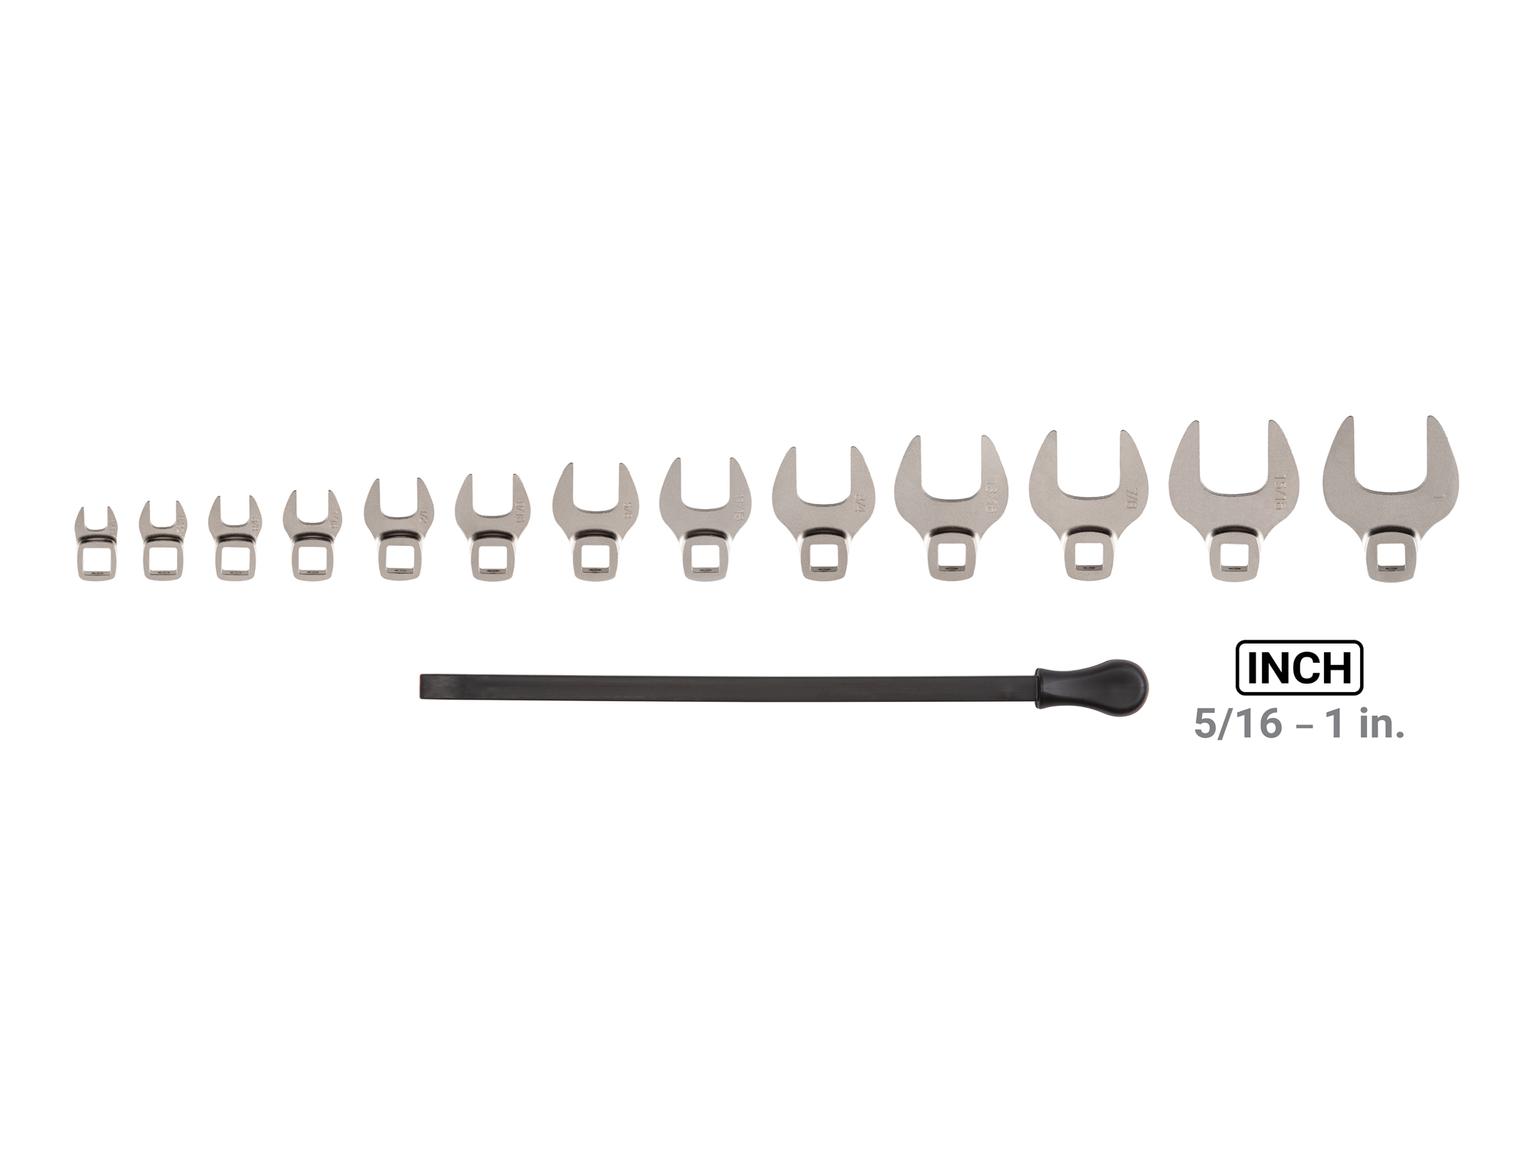 TEKTON WCF94102-T 3/8 Inch Drive Crowfoot Wrench Set with Key, 13-Piece (5/16-1 in.)